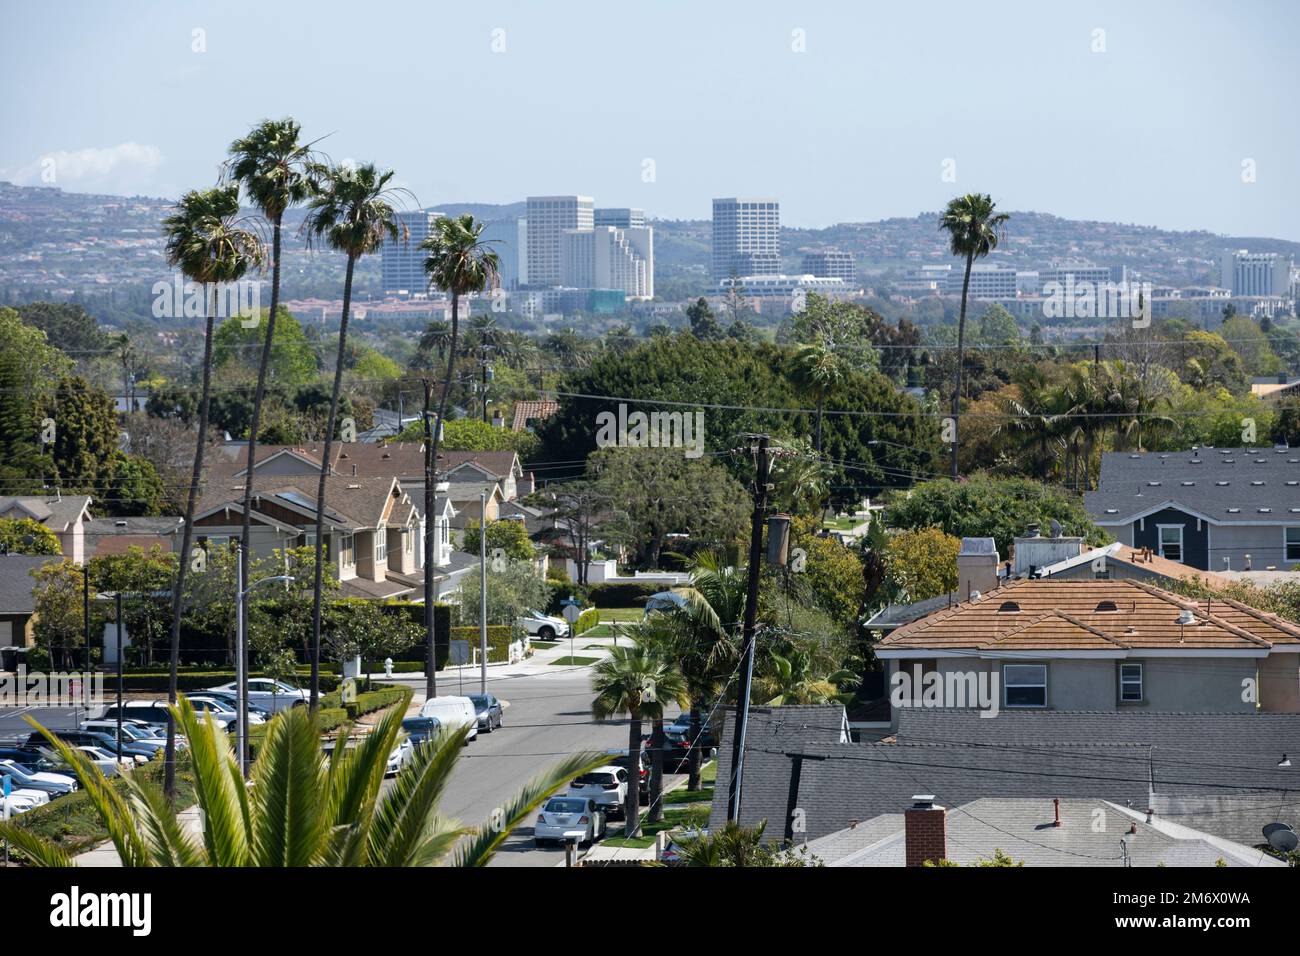 Palm framed view of downtown Costa Mesa, California, USA. Stock Photo